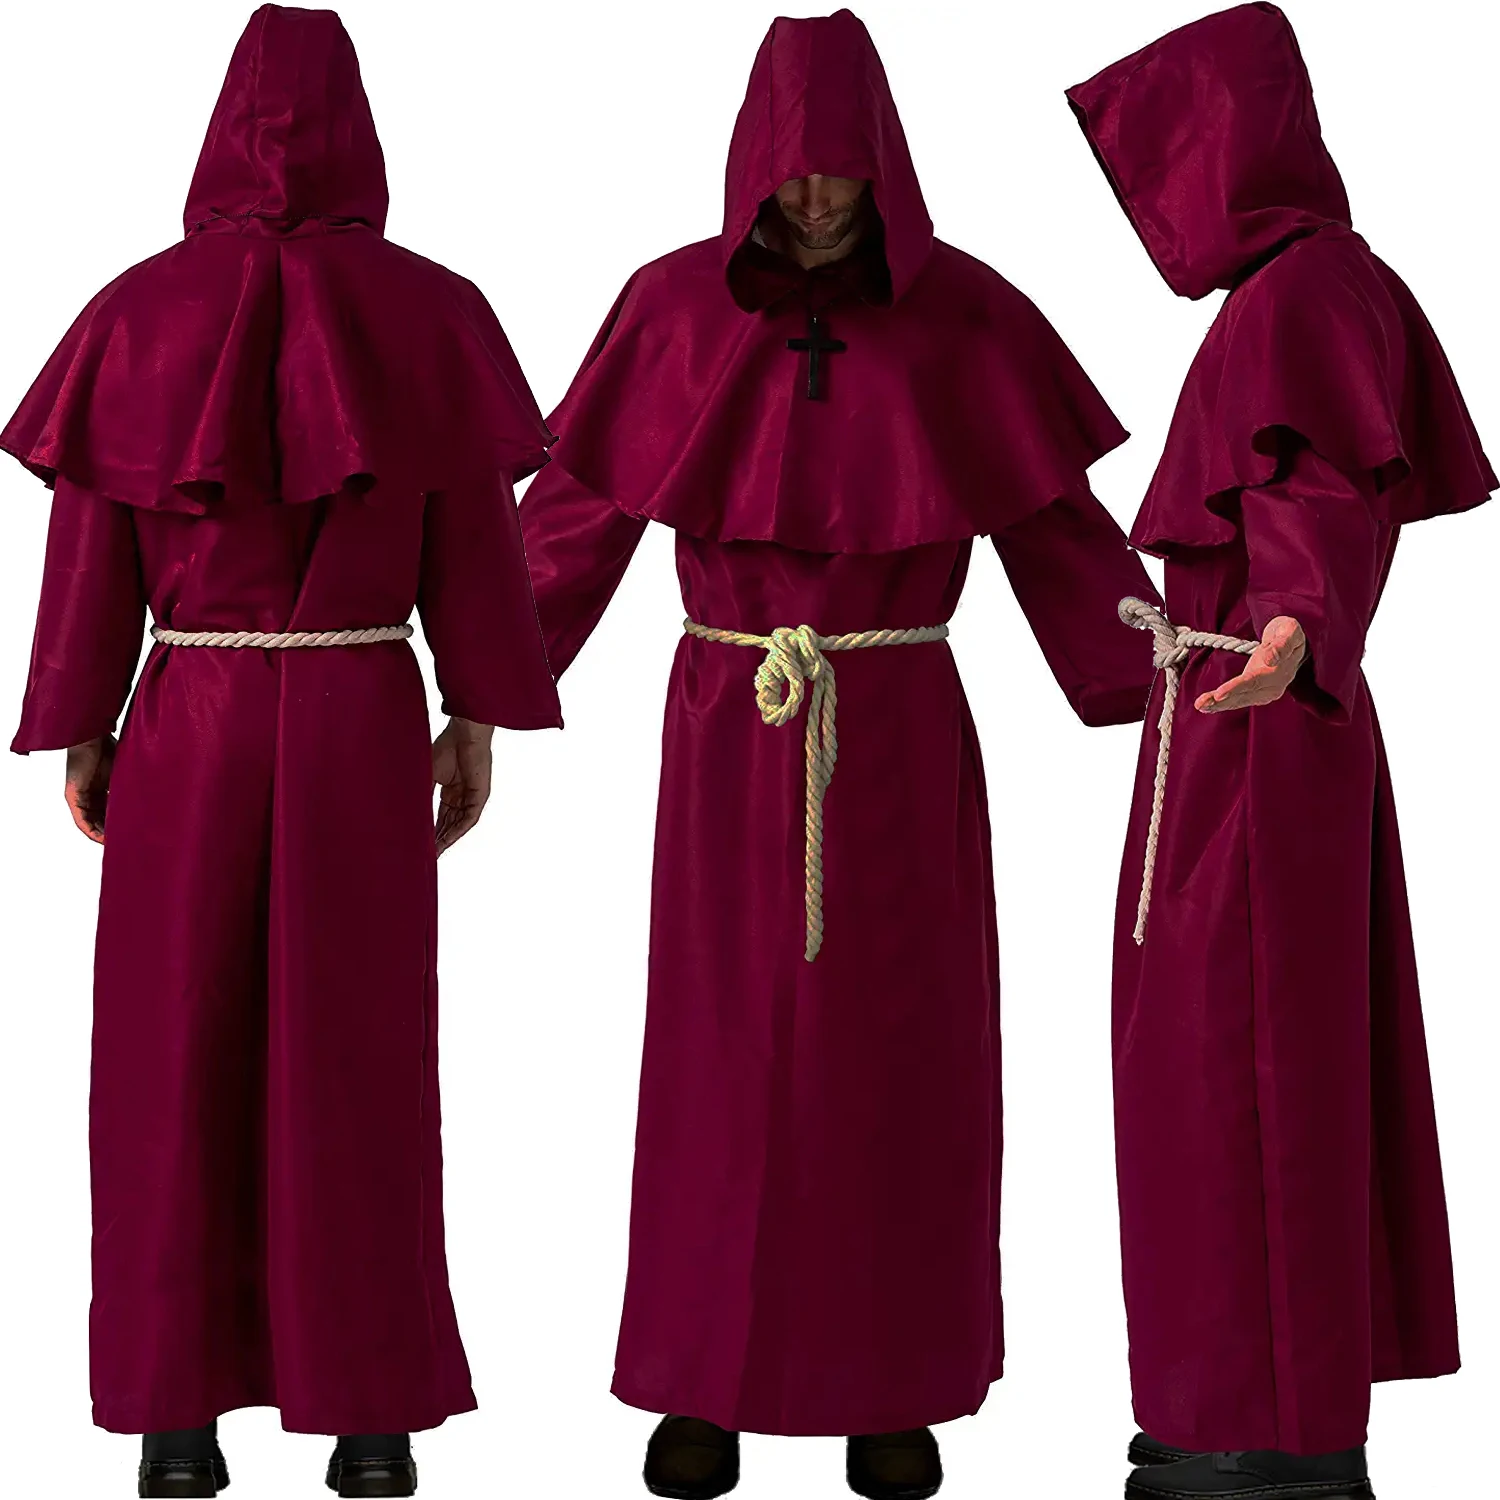 

New Unisex Halloween Robe Hooded Cloak Costume Cosplay Monk Suit Adult Role-playing Decoration Plague Doctor Reaper Clothing